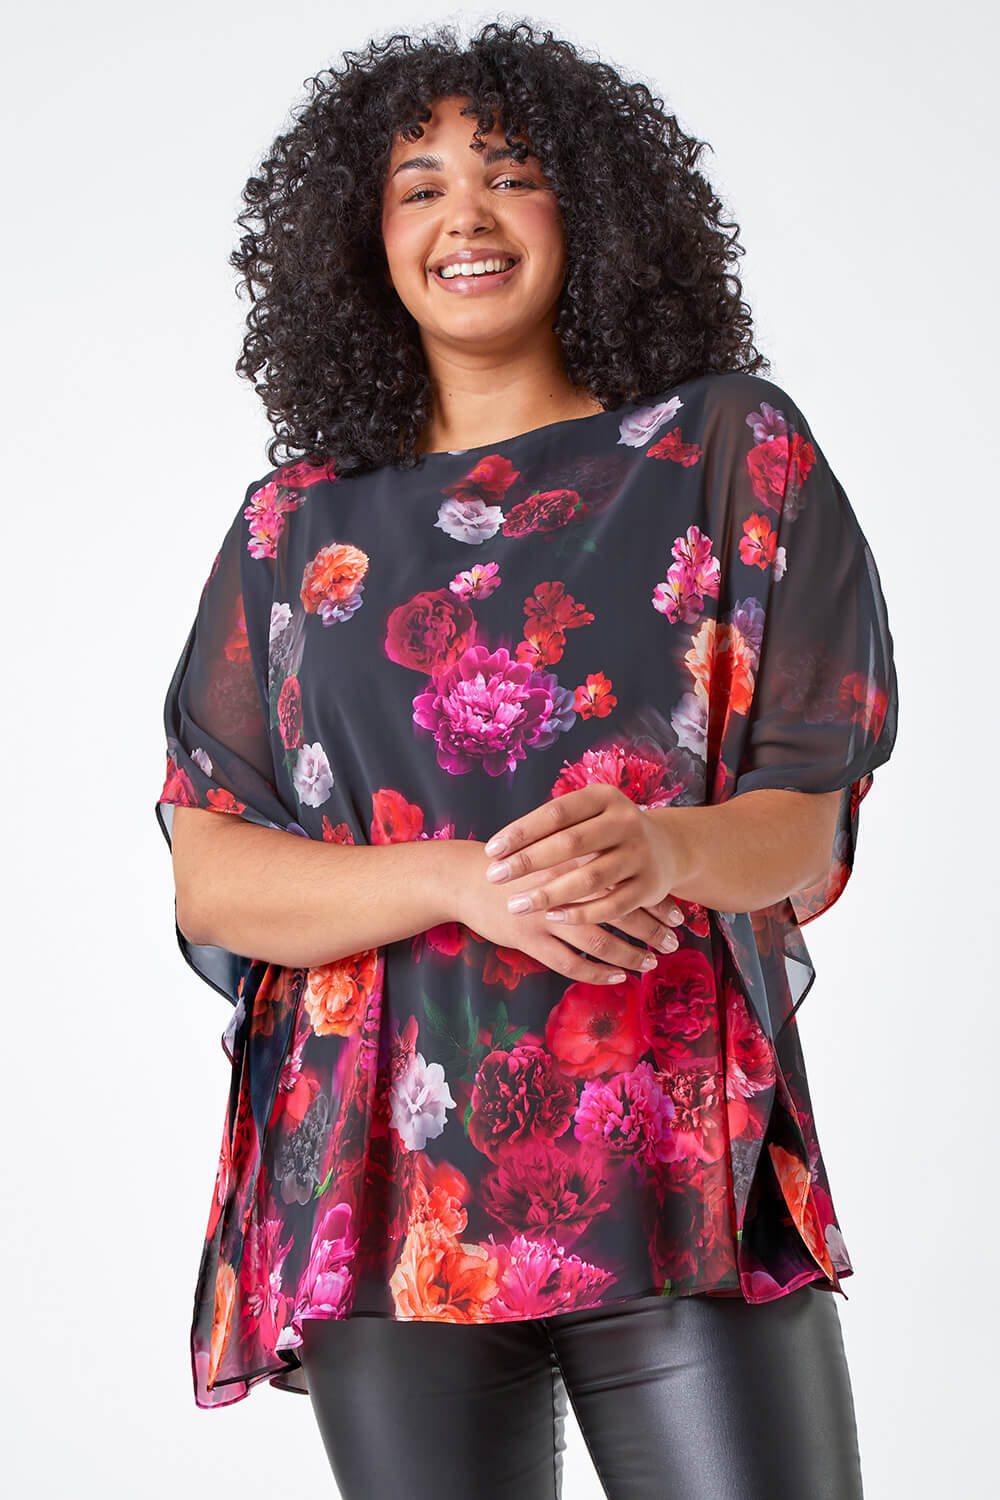 PINK Curve Floral Print Chiffon Overlay Top, Image 1 of 5